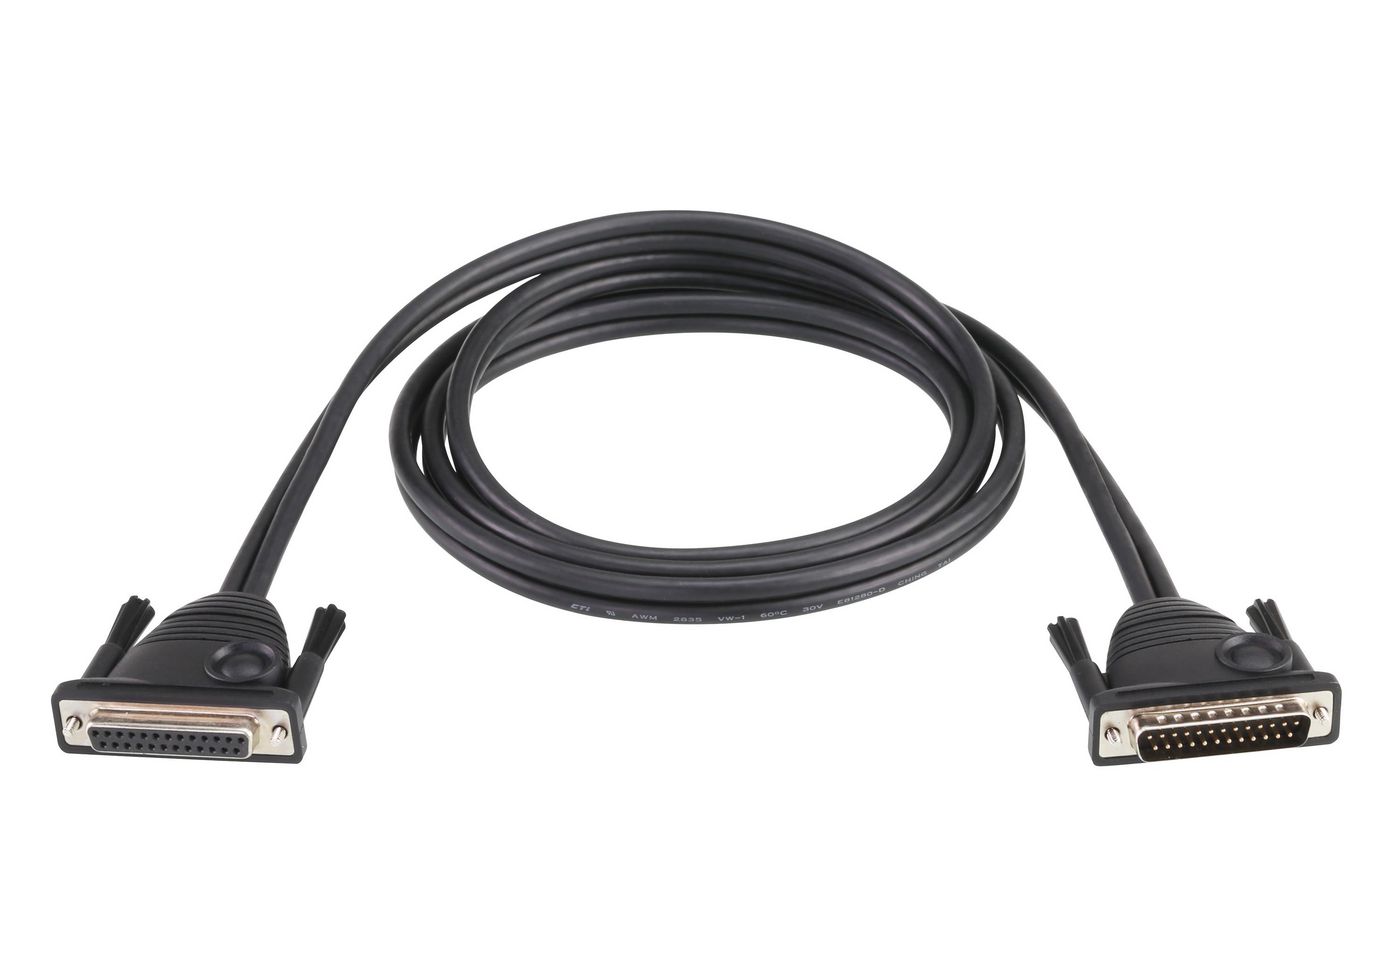 Aten 2L-2715 Daisy Cable for Cat 5 KVM 